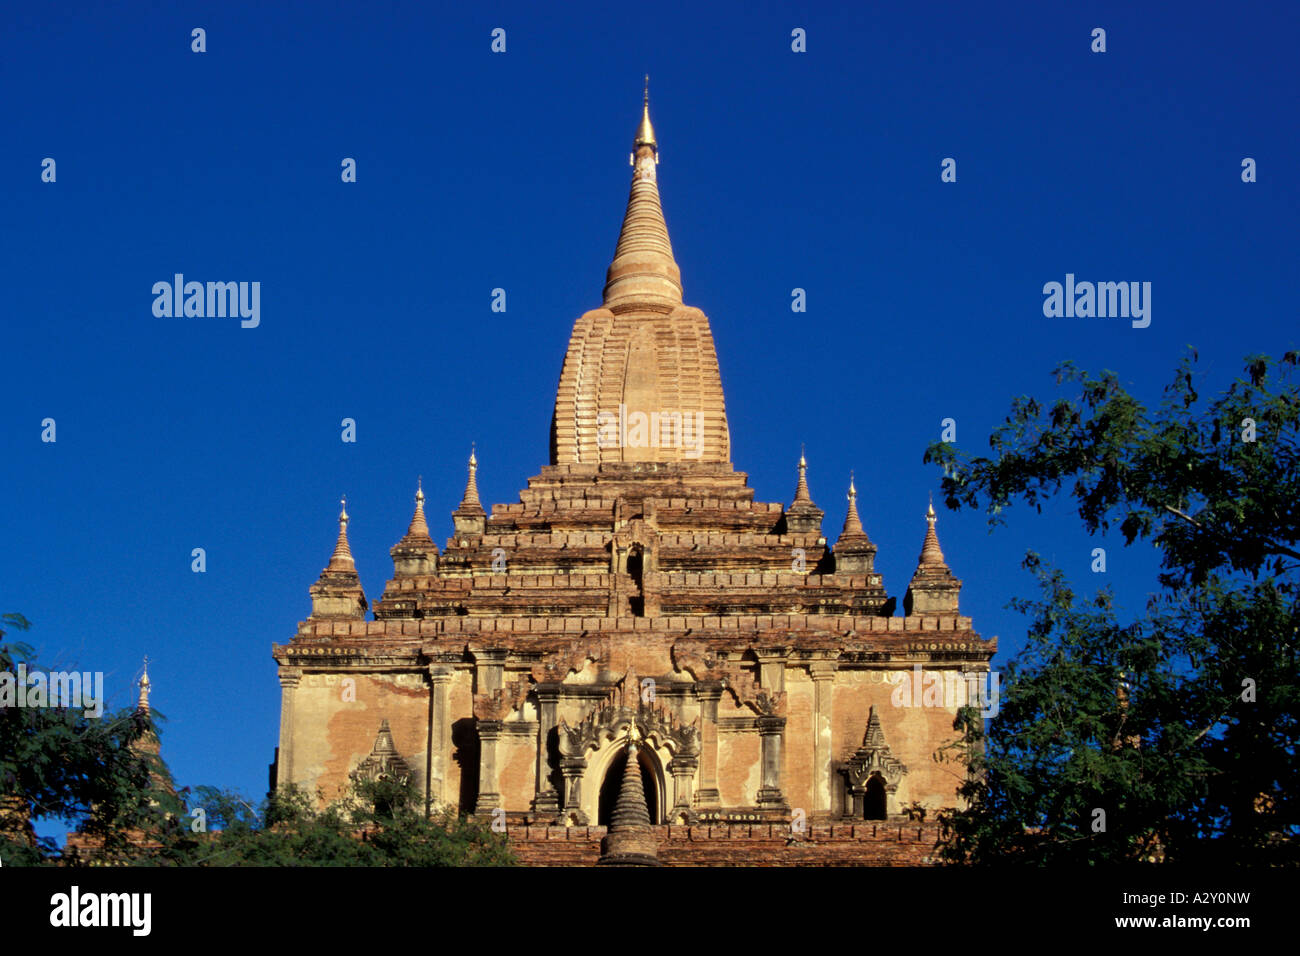 Sulemani Pahto with Its Golden Stupa, Bagan, Myanmar Stock Photo